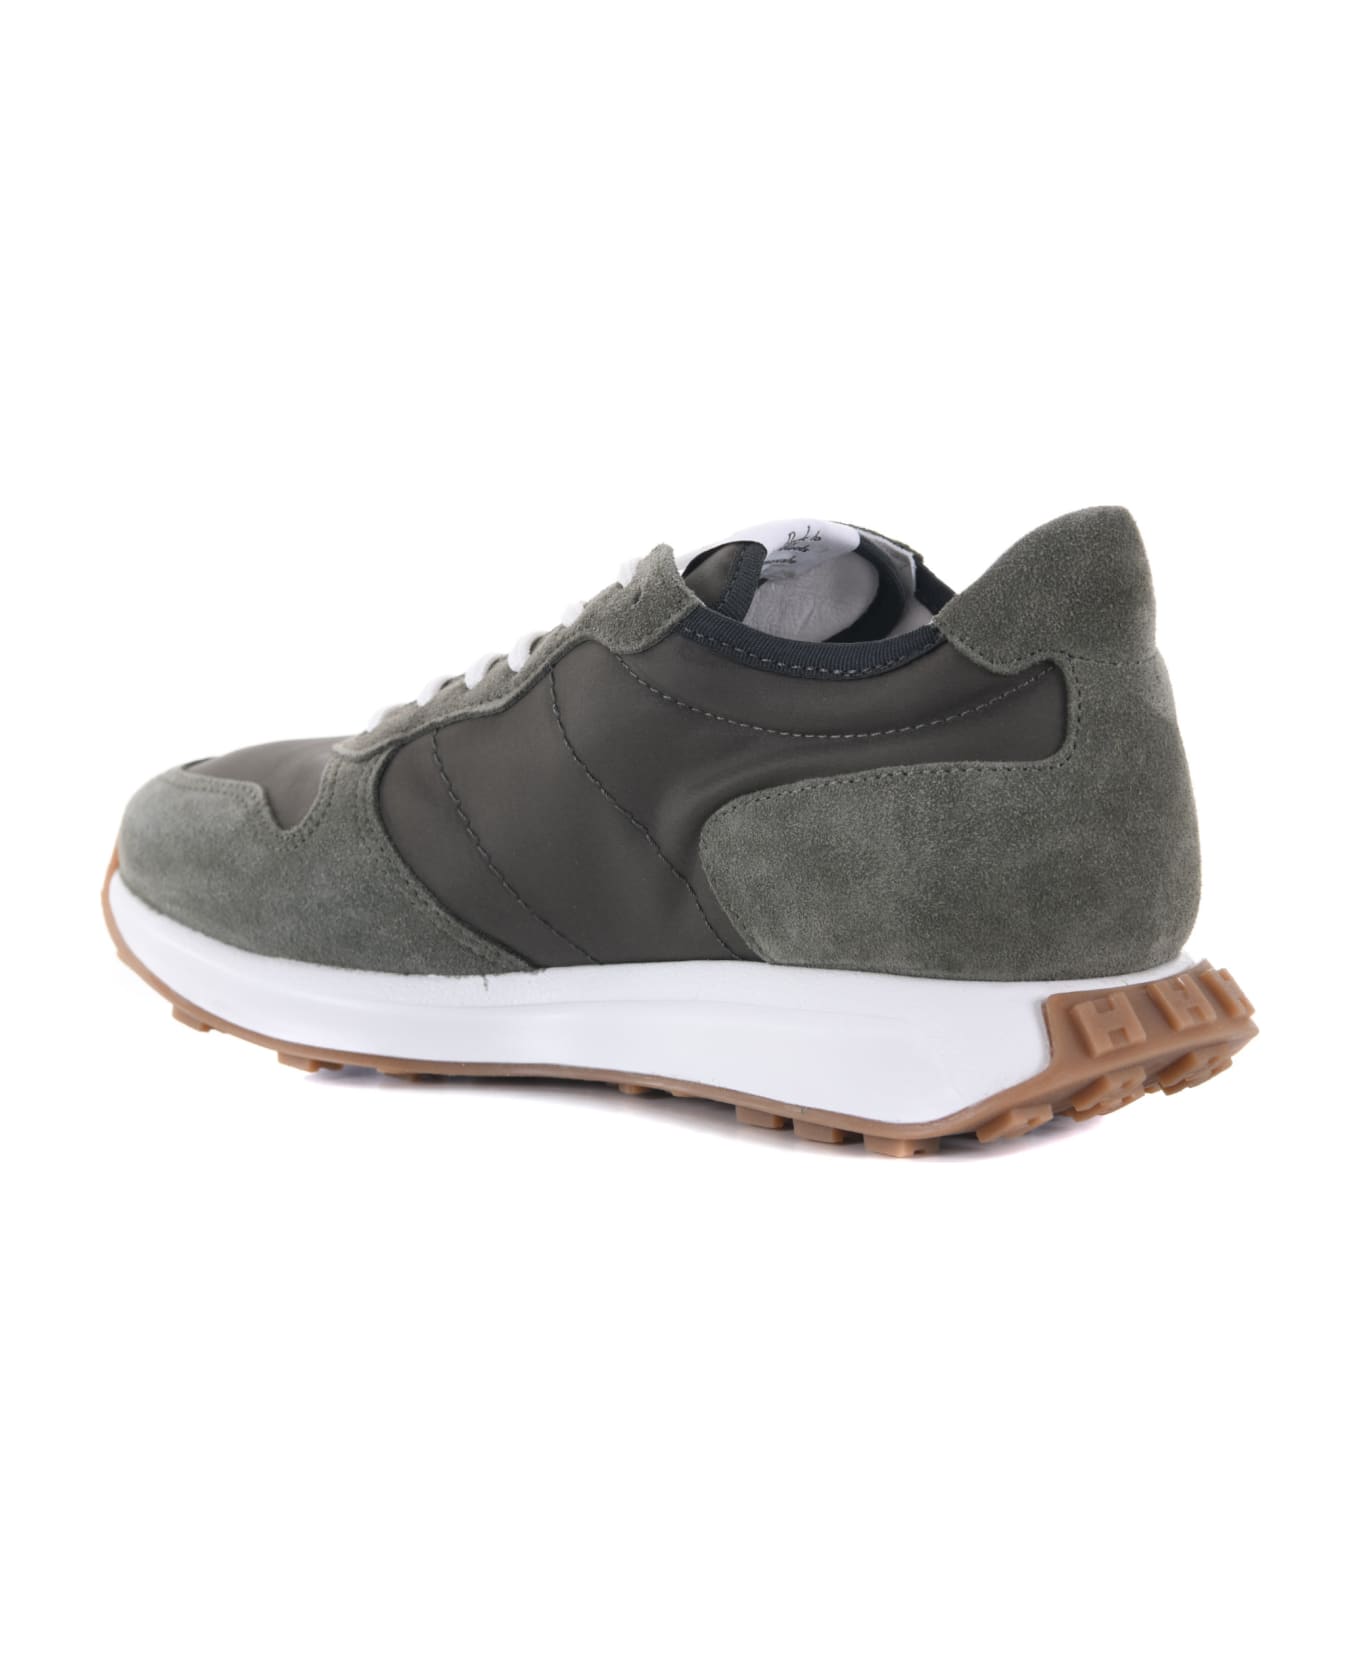 Hogan Sneakers In Suede And Nylon - Verde militare